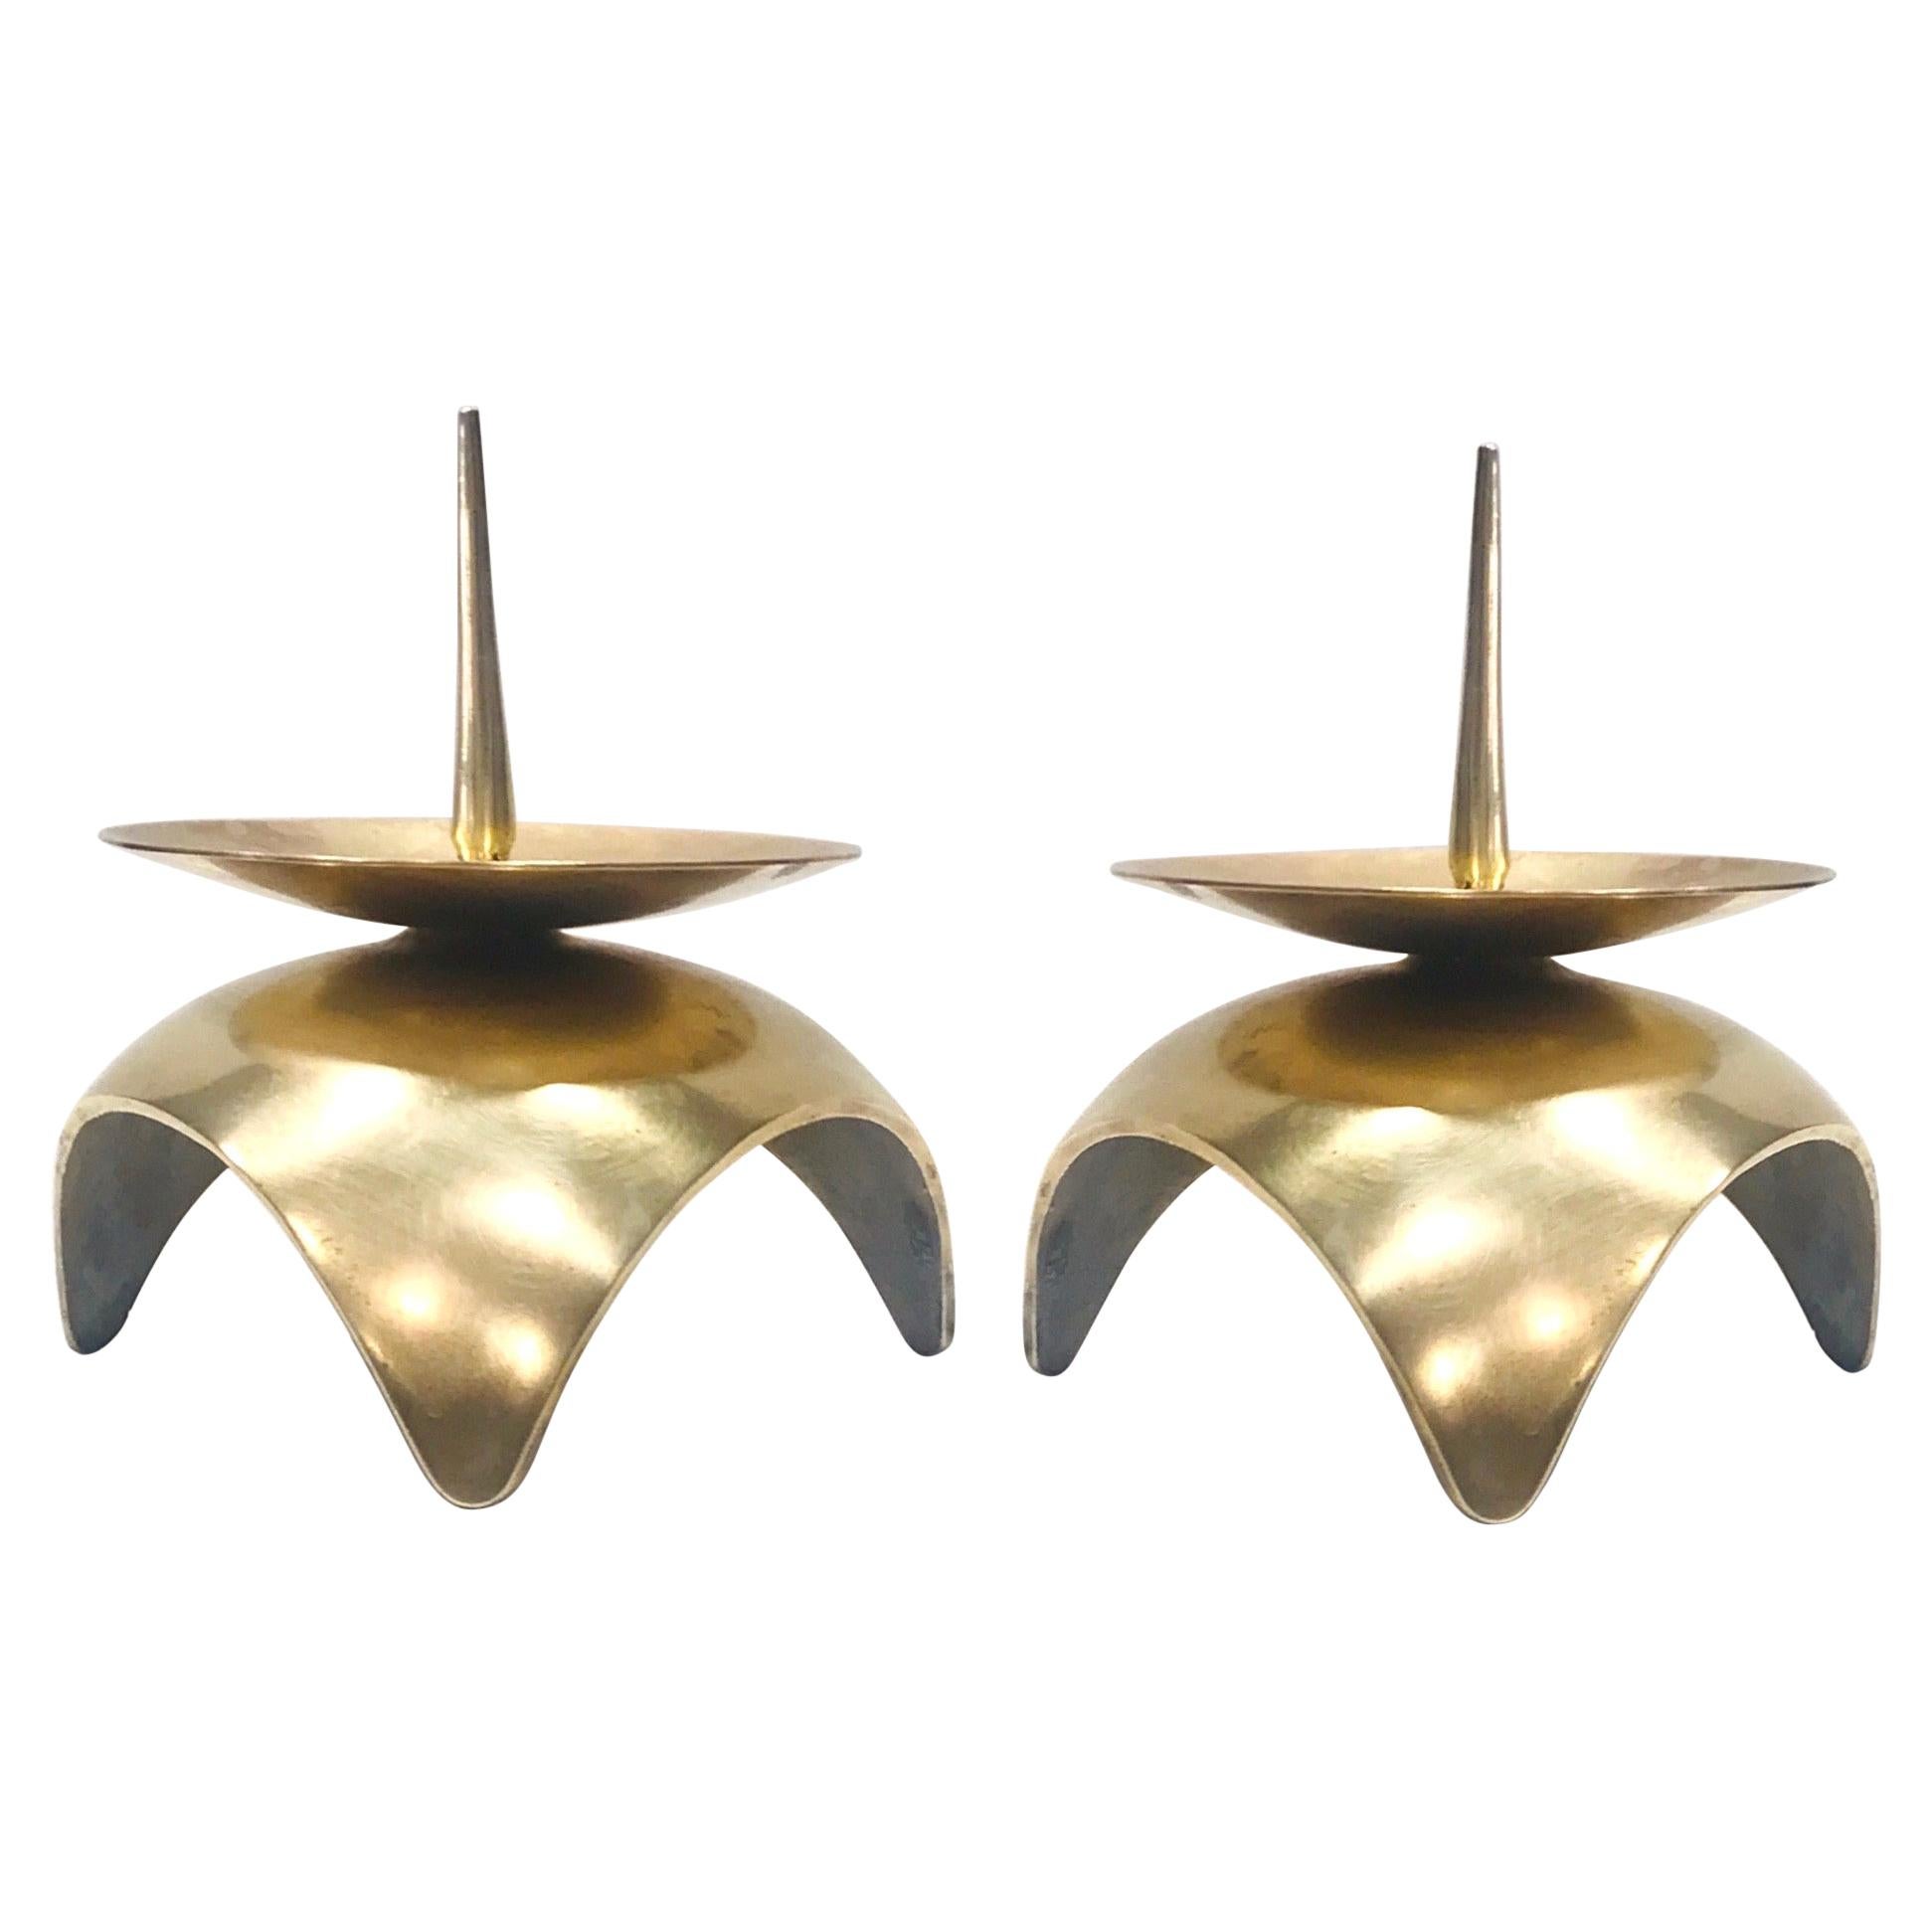 Mid-Century Modern Brutalist Japanese Candleholders in Solid Brass, circa 1960s